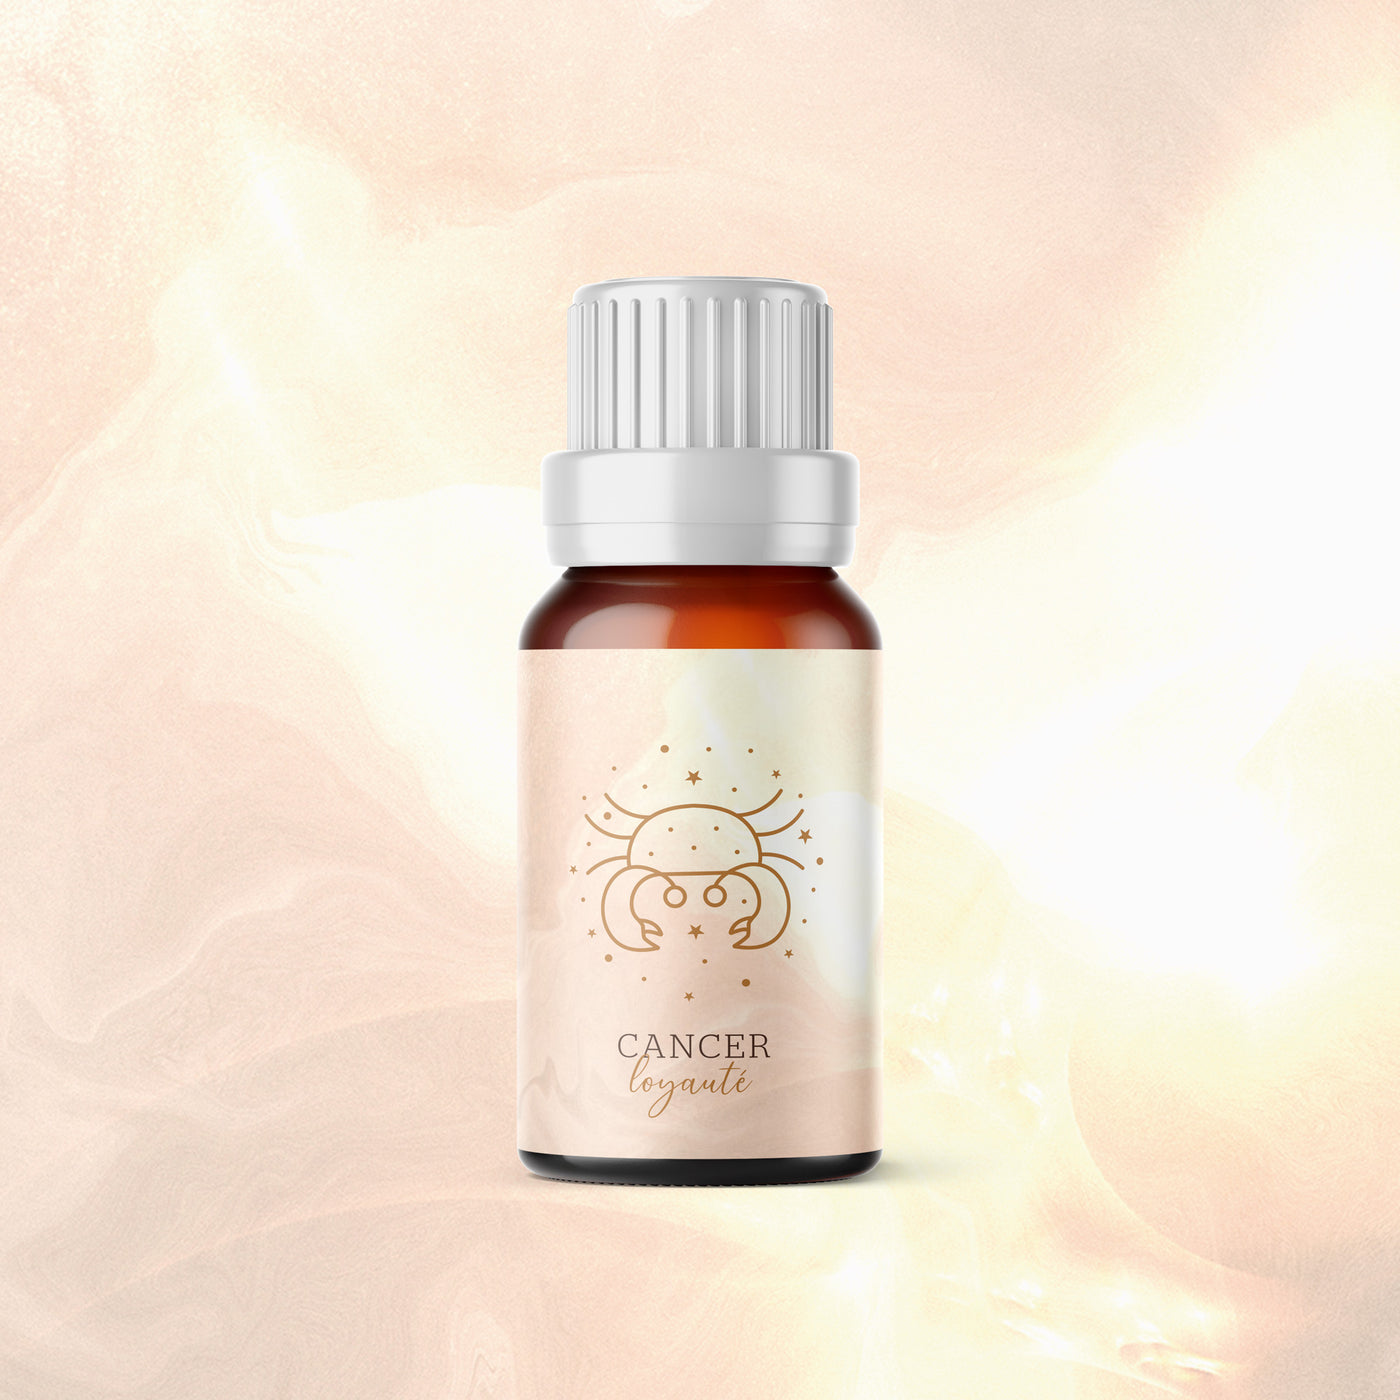 Cancer - synergie aromatique 100% pure